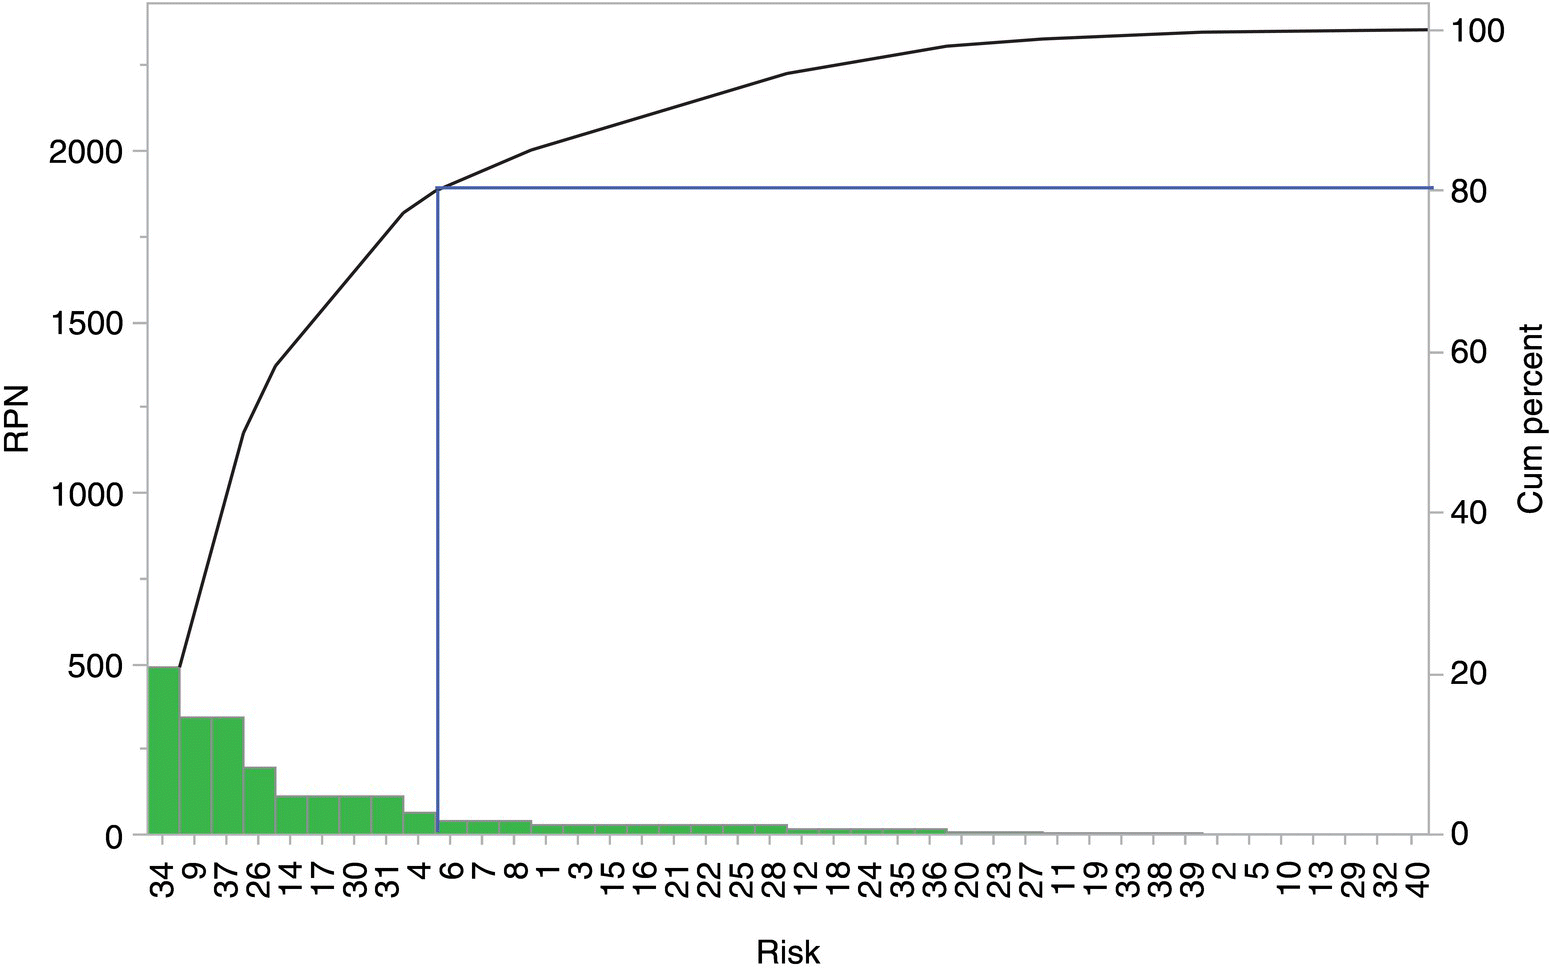 Pareto chart of the relative risk (RPN) and cumulative risk (cum. percent) against risk number ordered by risk size, depicted by clustered bars with an ascending curve attached to the highest peak.